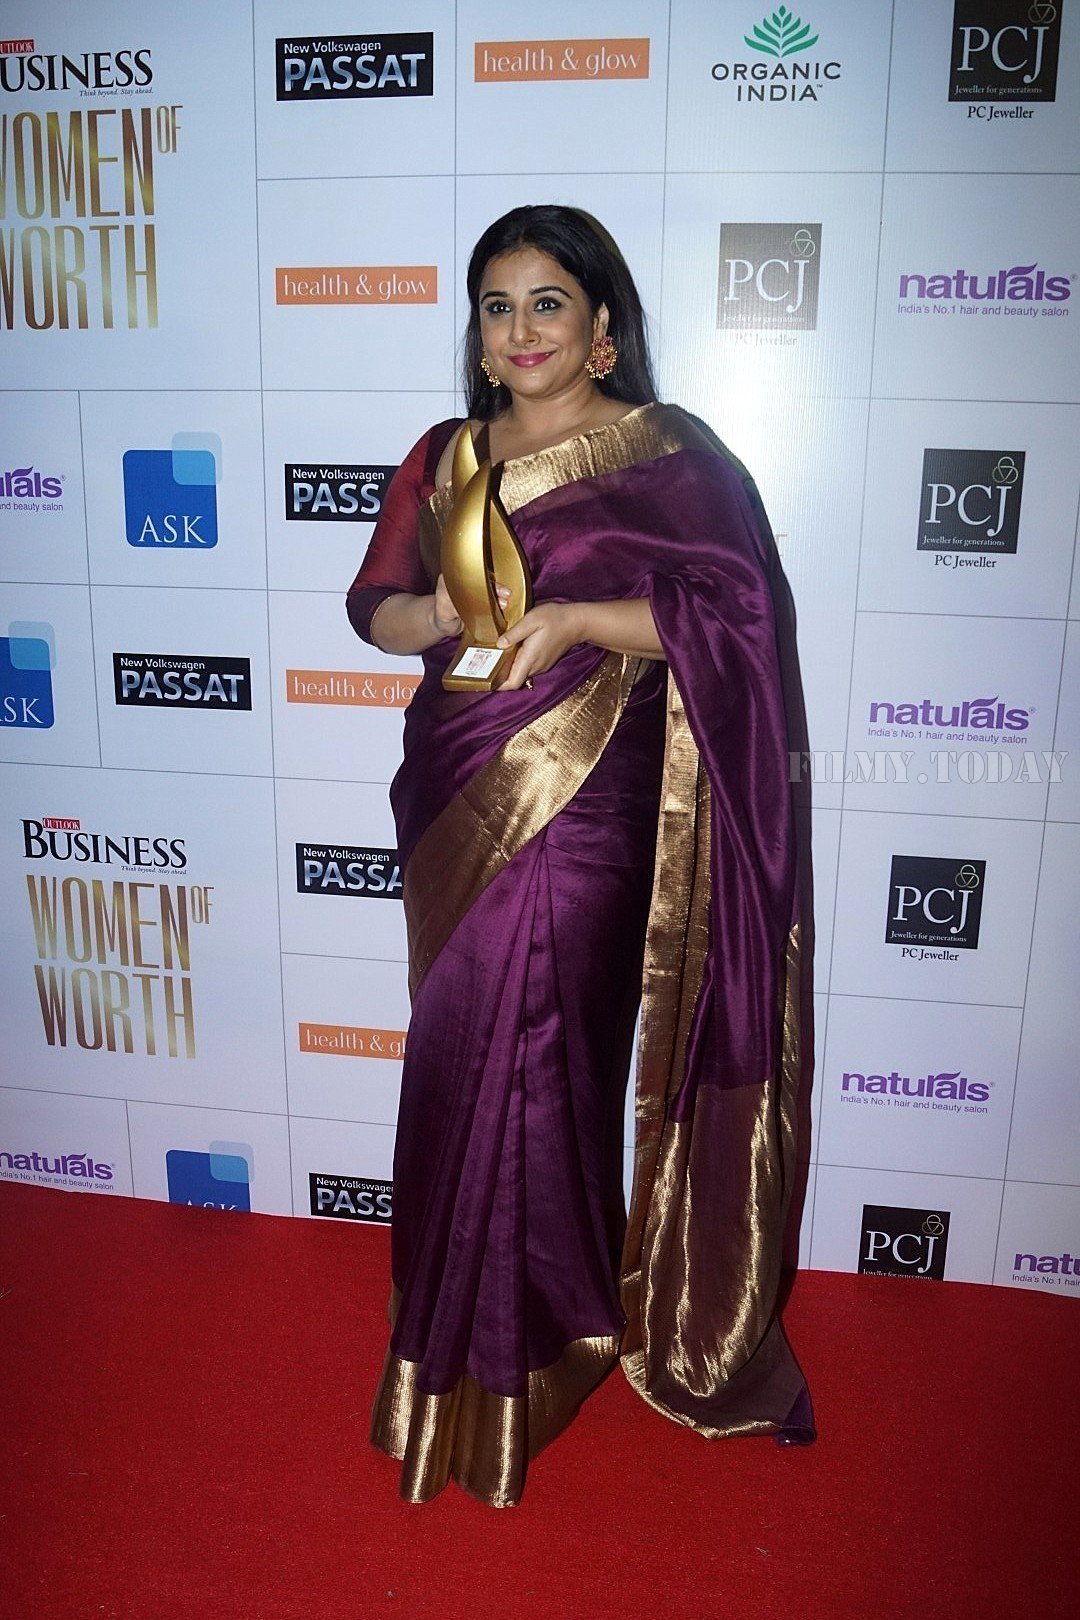 Vidya Balan - In Pics: The Outlook Business Women Of Worth Awards 2017 | Picture 1543477